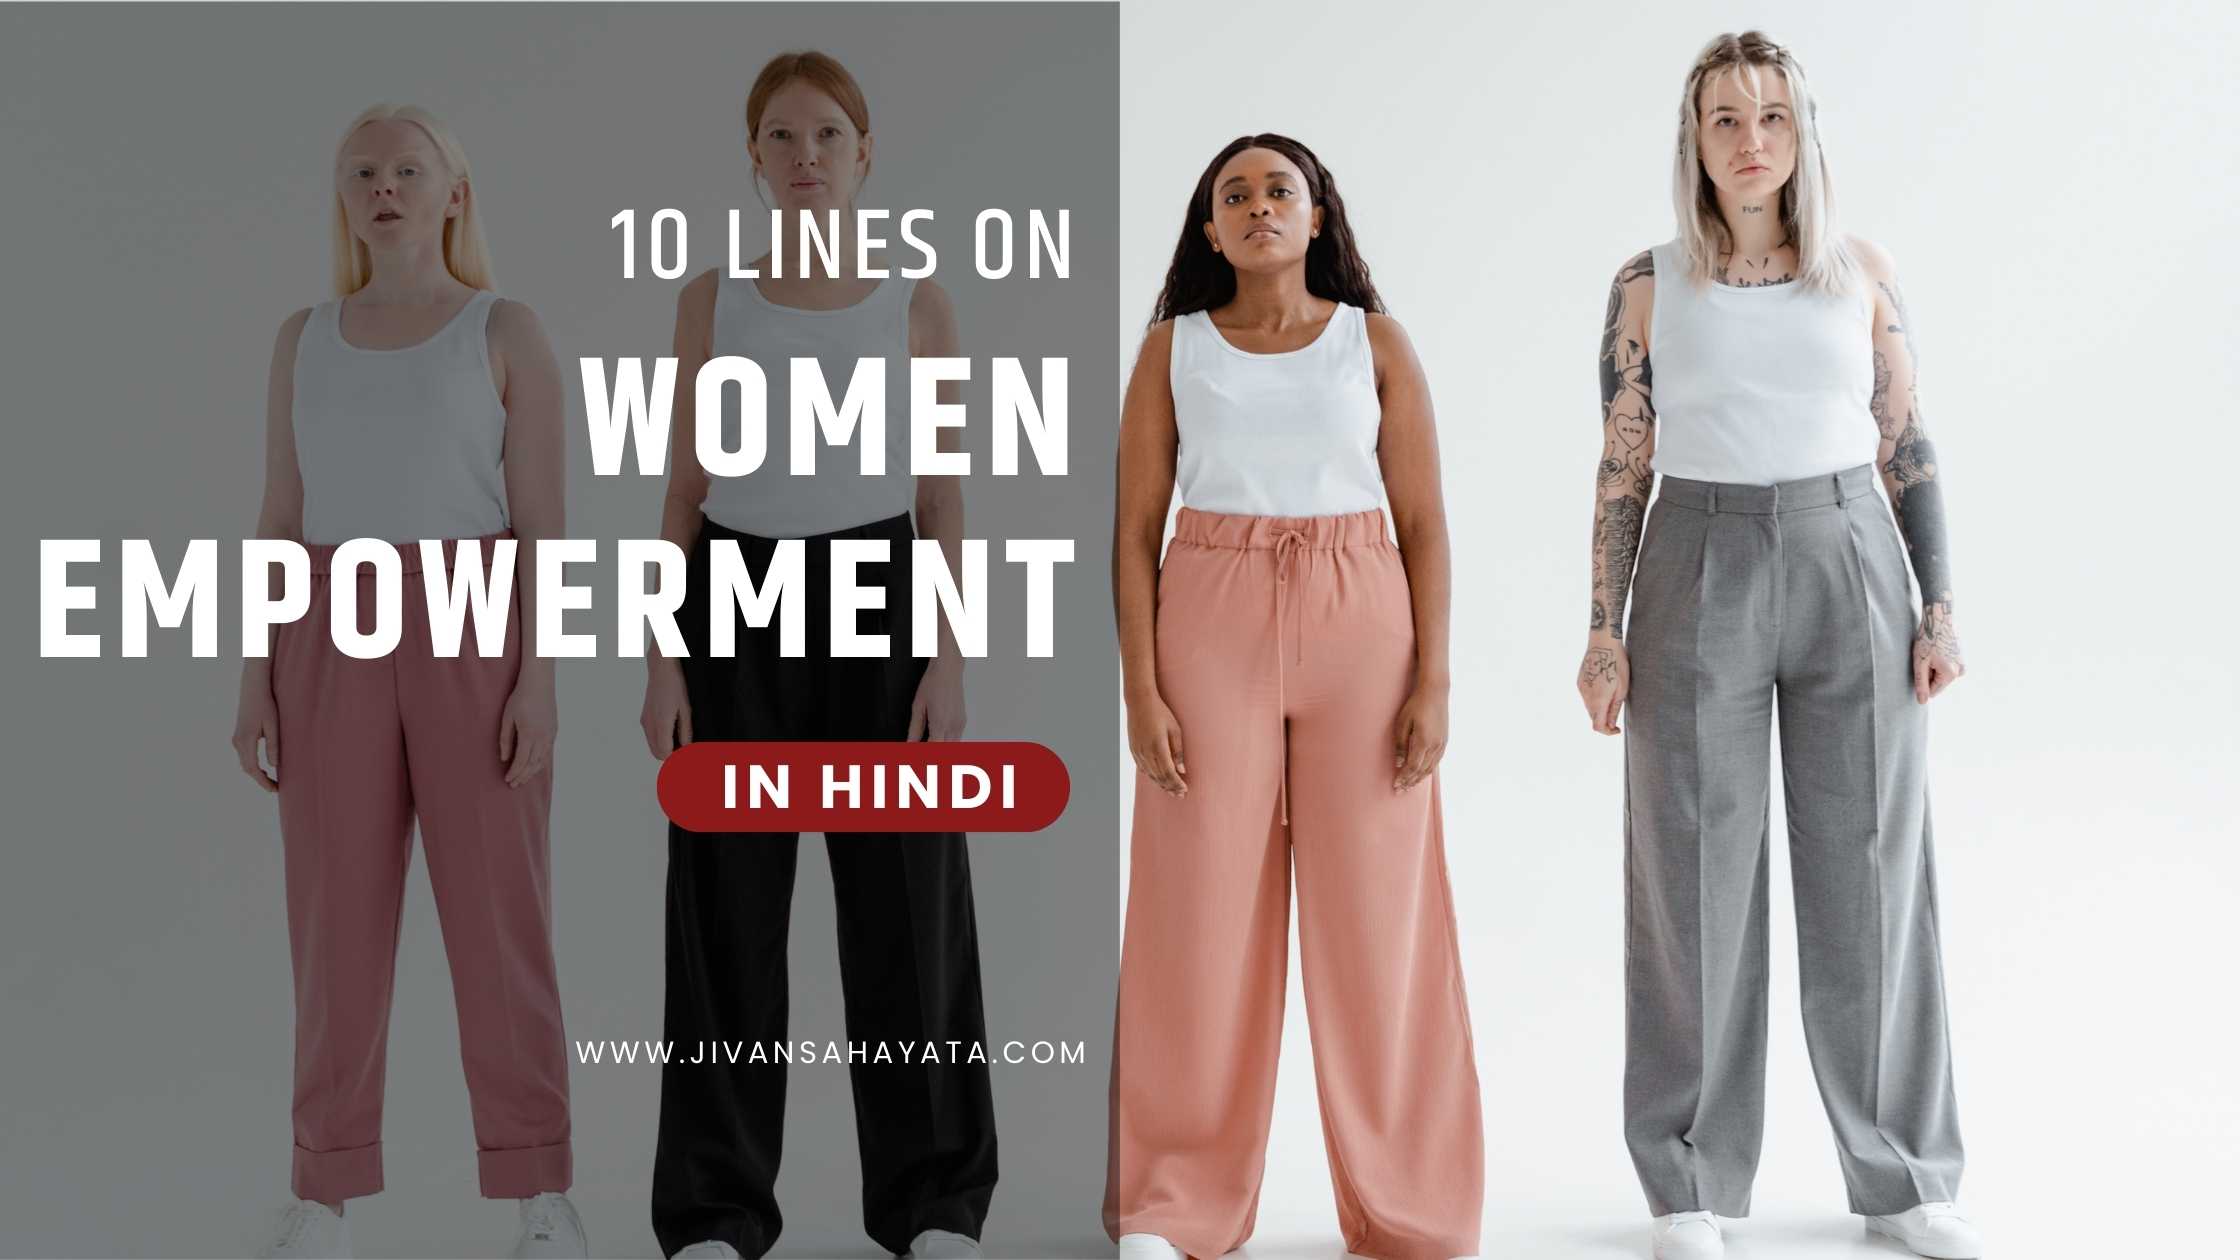 10 Lines on Women Empowerment in Hindi